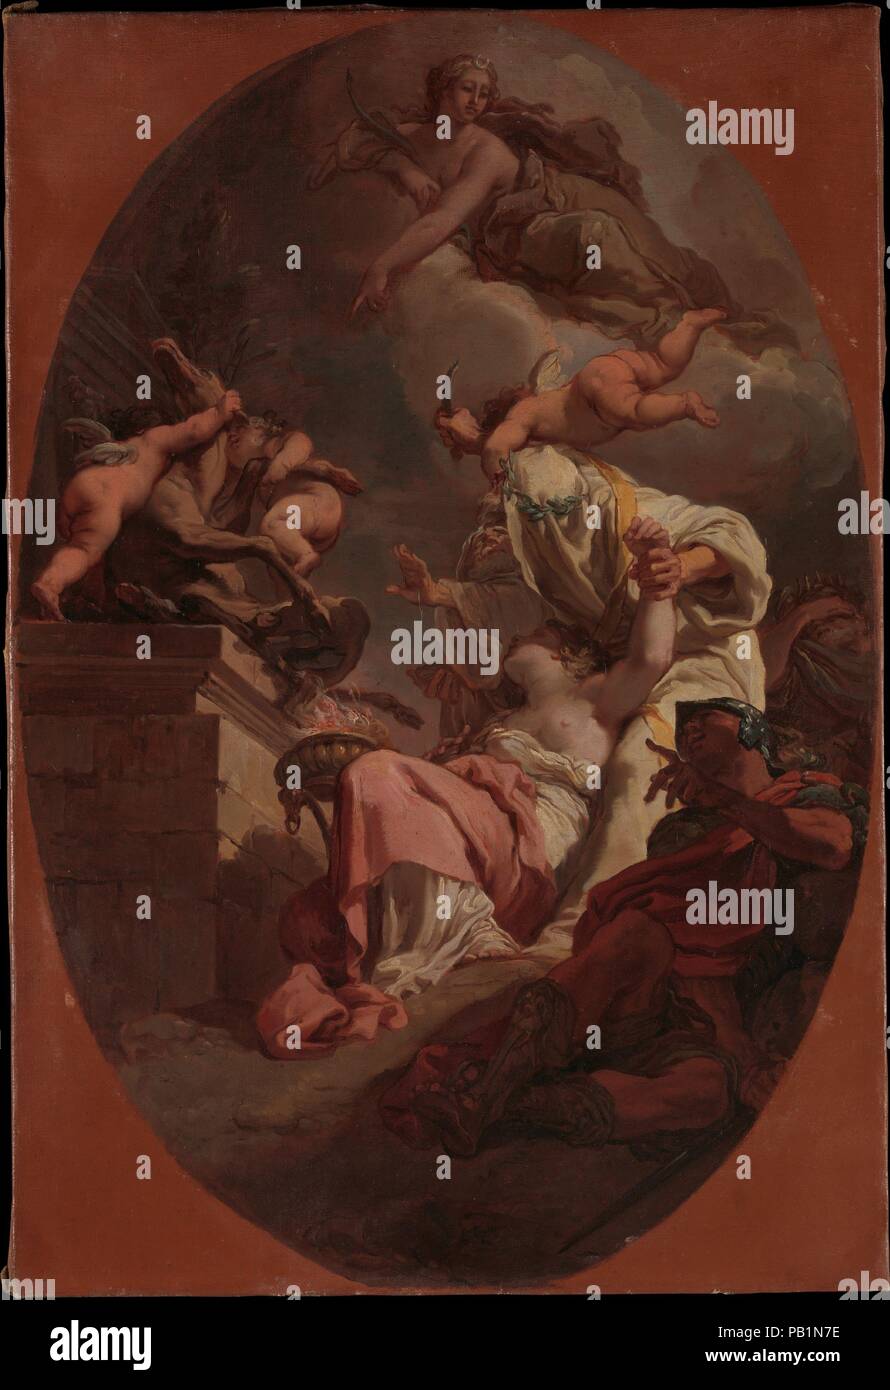 The Sacrifice of Iphigenia. Artist: Gaetano Gandolfi (Italian, San Matteo della Decima 1734-1802 Bologna). Dimensions: 26 7/8 × 18 in. (68.3 × 45.7 cm). Date: 1789.  This oil sketch for a ceiling in a room of Palazzo Gnudi Scagliarini in Bologna takes its subject from the great Greek playwright Euripides (ca. 480-406 BC). Agamemnon's daughter is about to be sacrificed to appease the goddess Diana, who at the climactic moment appears and substitutes a deer on the altar. A flying putto stays the hand of the priest while the warrior Achilles, who had attempted to intervene, lies on the ground, as Stock Photo